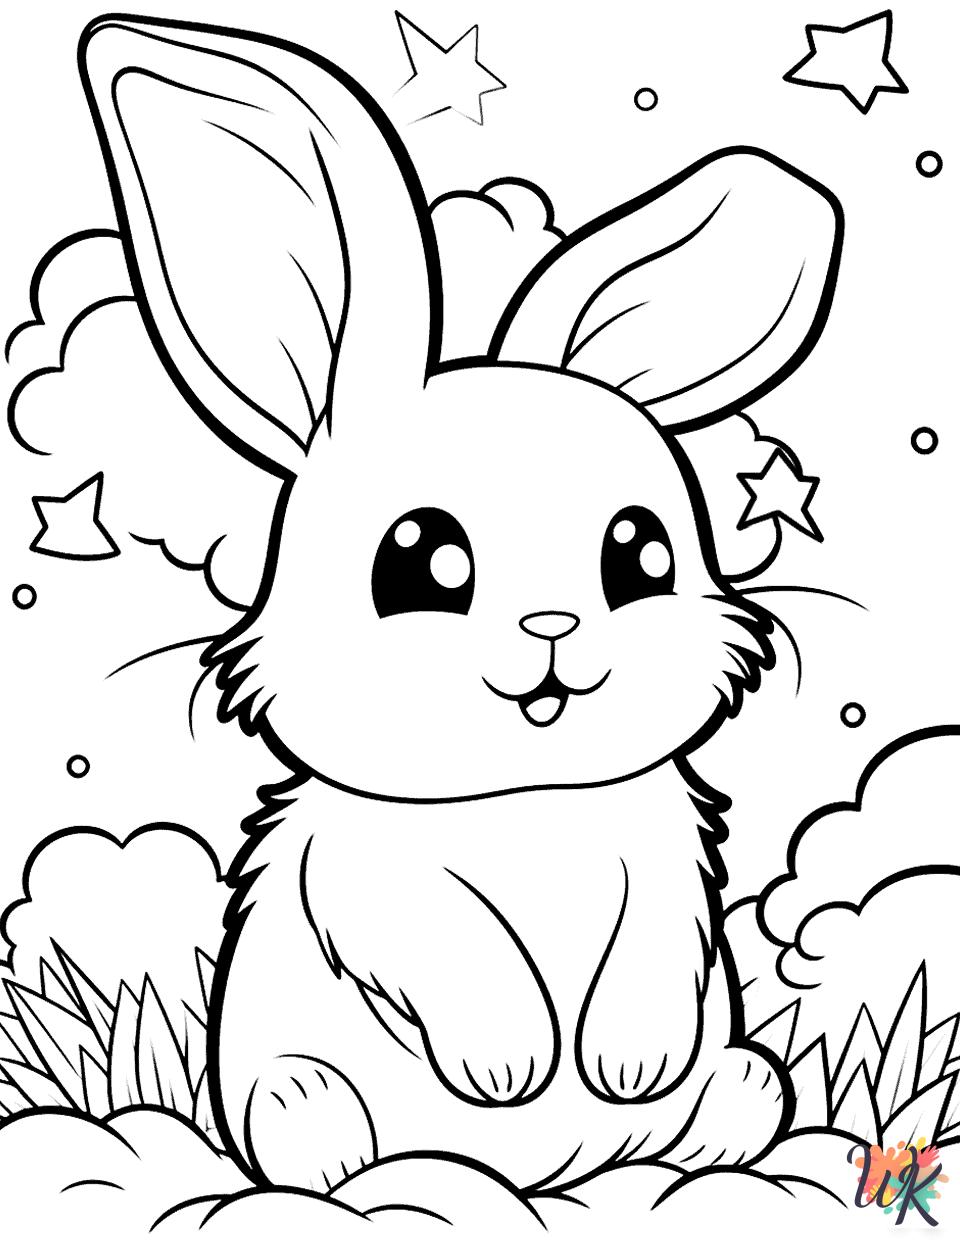 Rabbits coloring pages